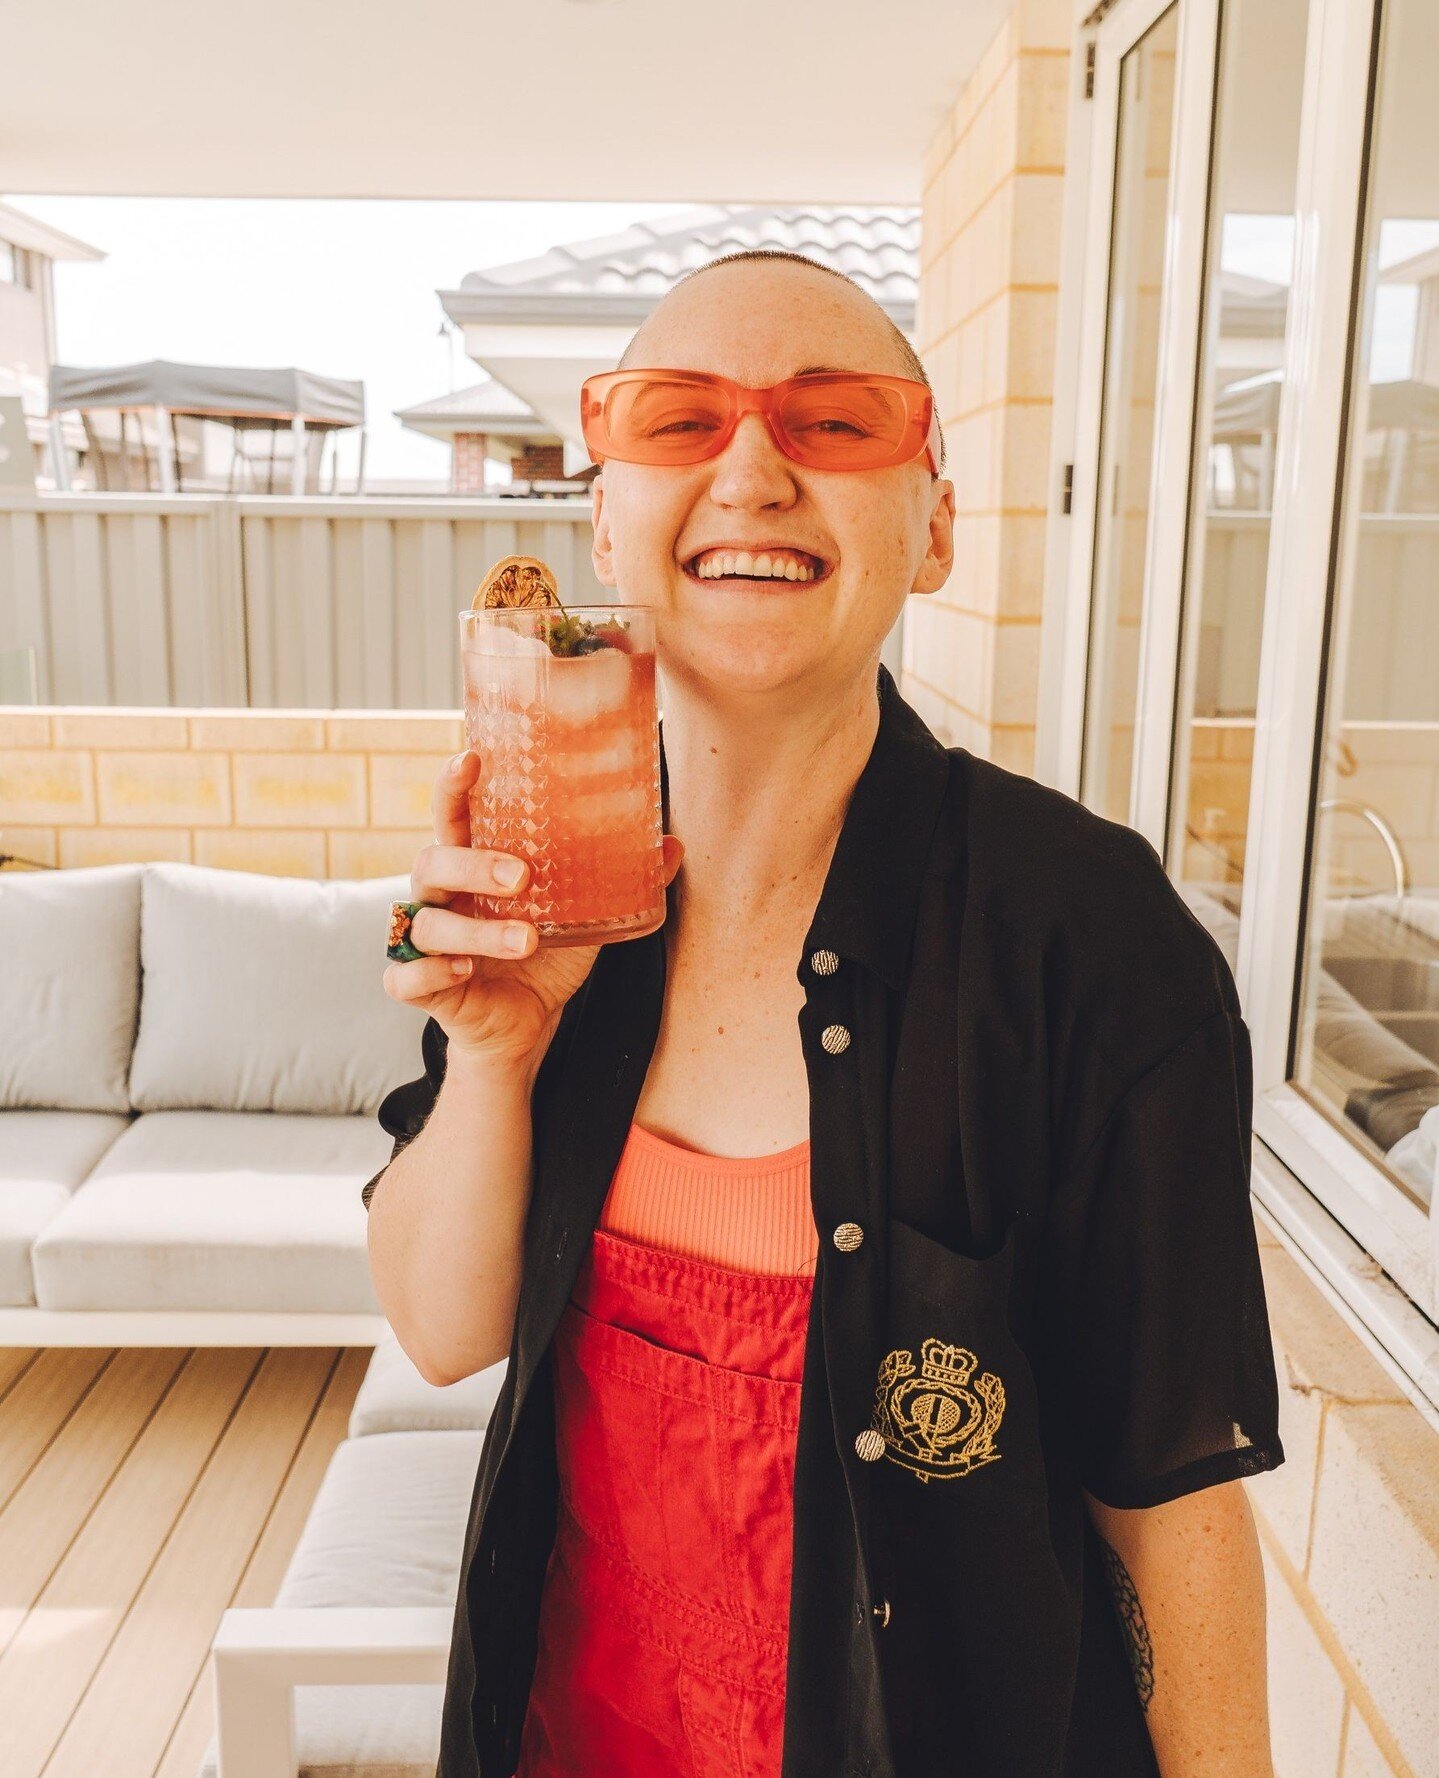 BIG FRIDAY VIBES 💦💦 it might have been a short week, but we're sure ready for a bevvy or three. ⁠
⁠
Thanks for the gorgeous snaps 📸 @halleymiranda